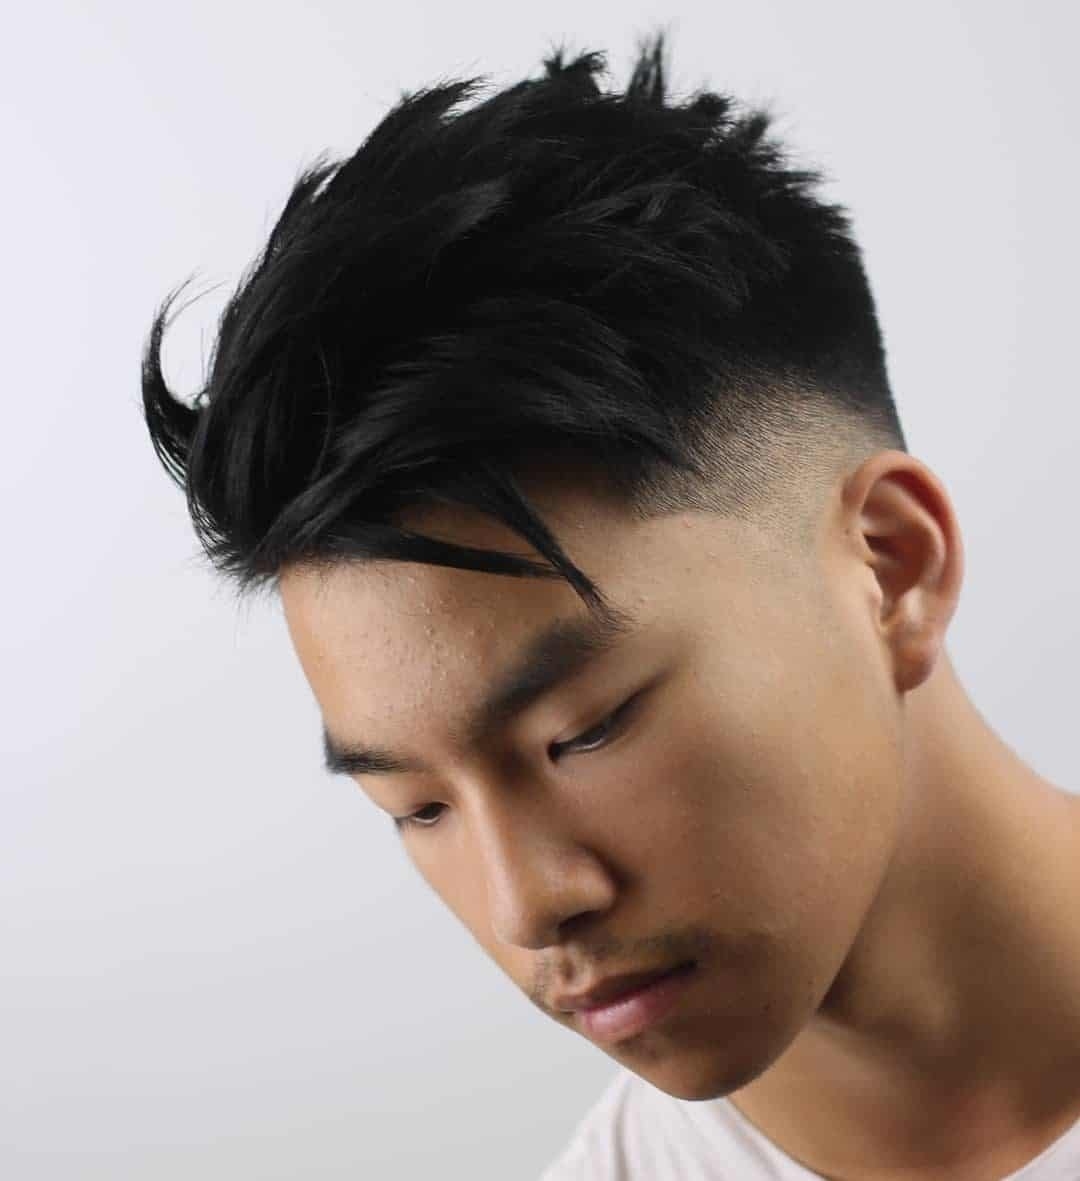 25 Asian Men Hairstyles- Style Up With The Avid Variety Of within The most ideal Short Asian Hairstyles Male